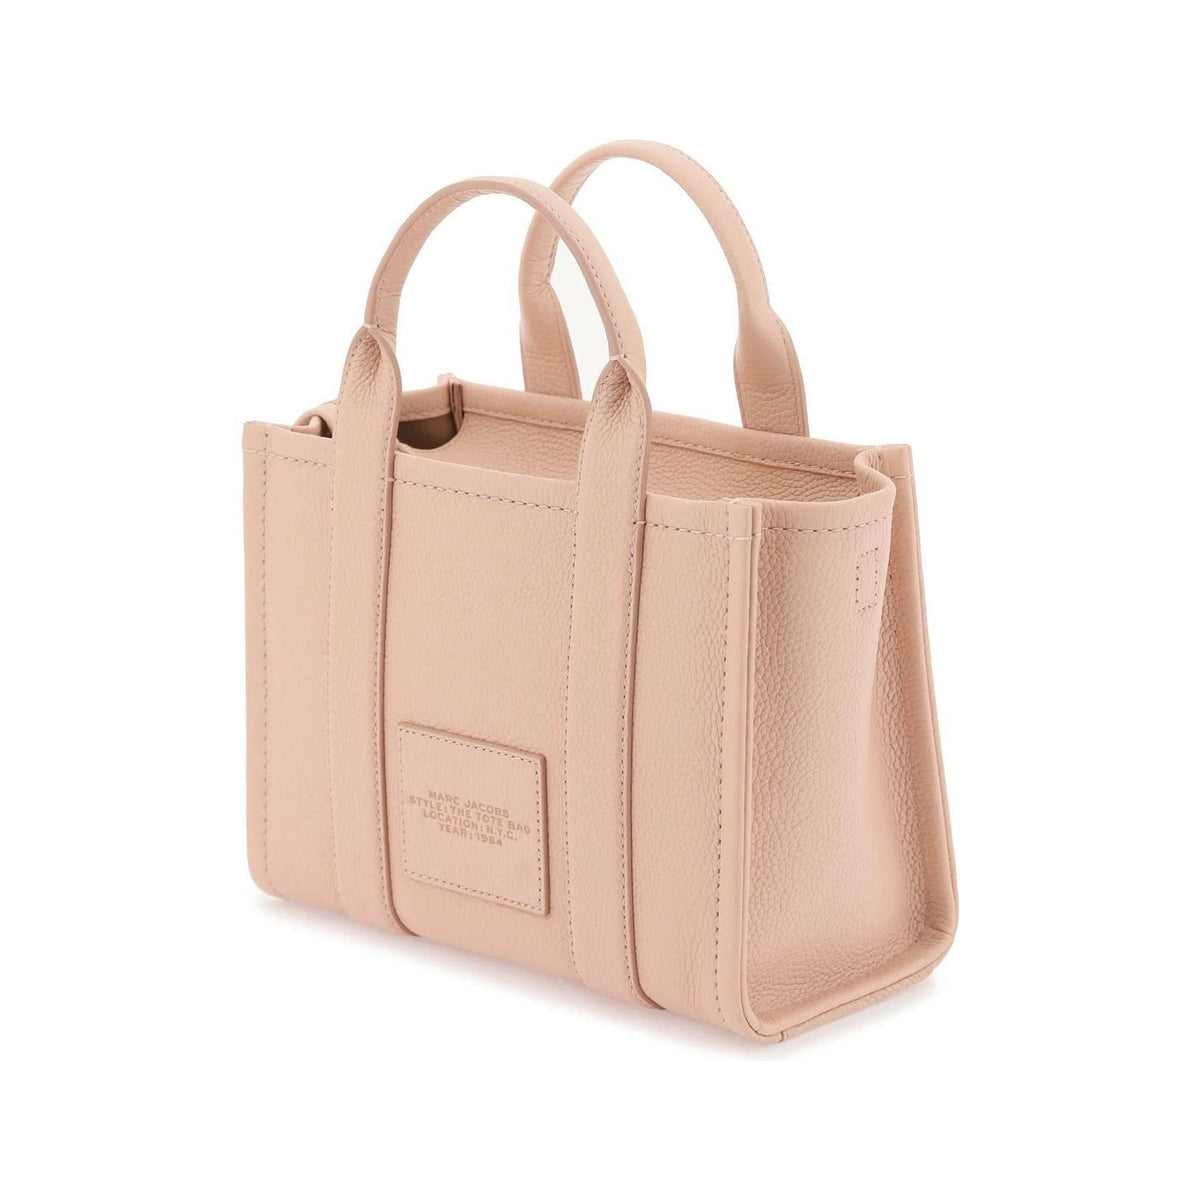 Rose The Leather Small Tote Bag MARC JACOBS JOHN JULIA.